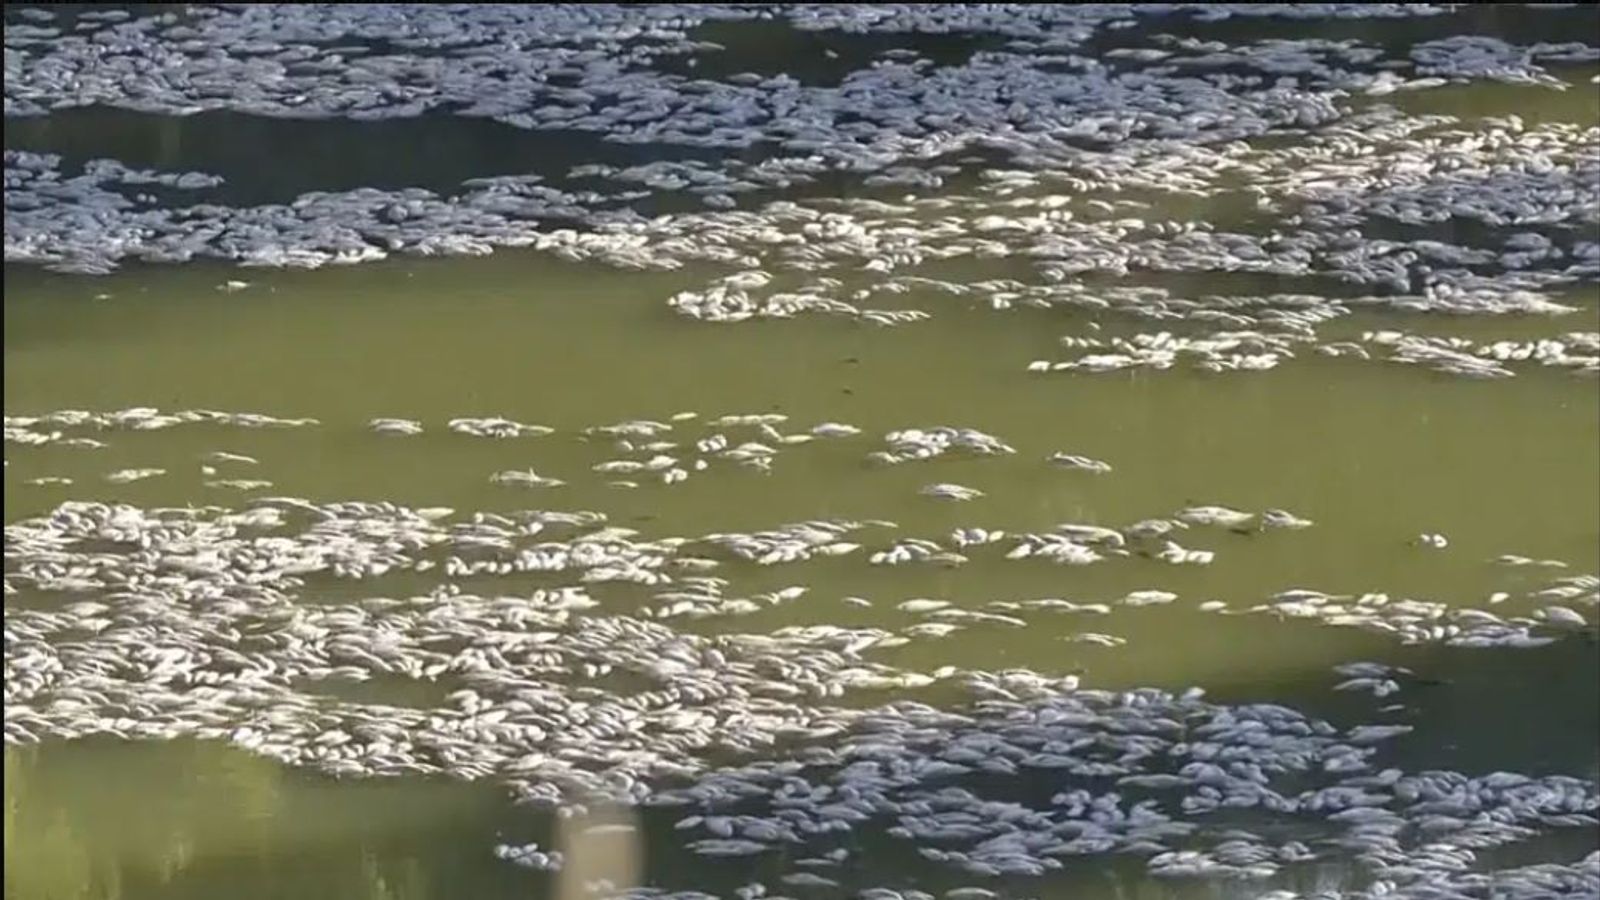 Australian police say removing millions of dead fish from Darling River near Menindee will be 'logistical nightmare'